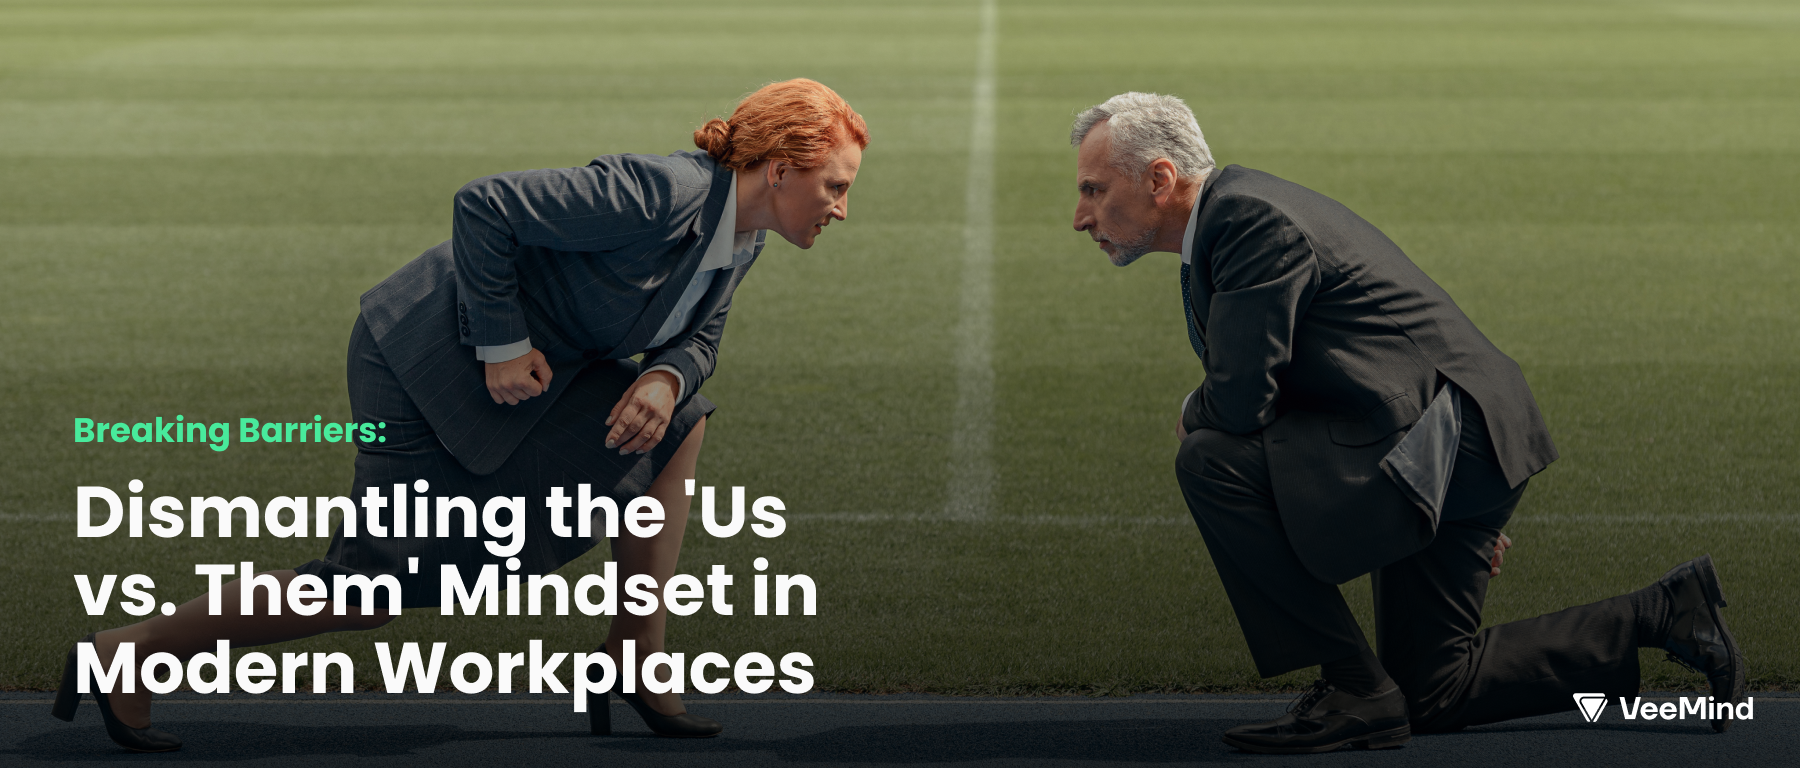 Breaking Barriers: Dismantling the 'Us vs. Them' Mindset in Modern Workplaces